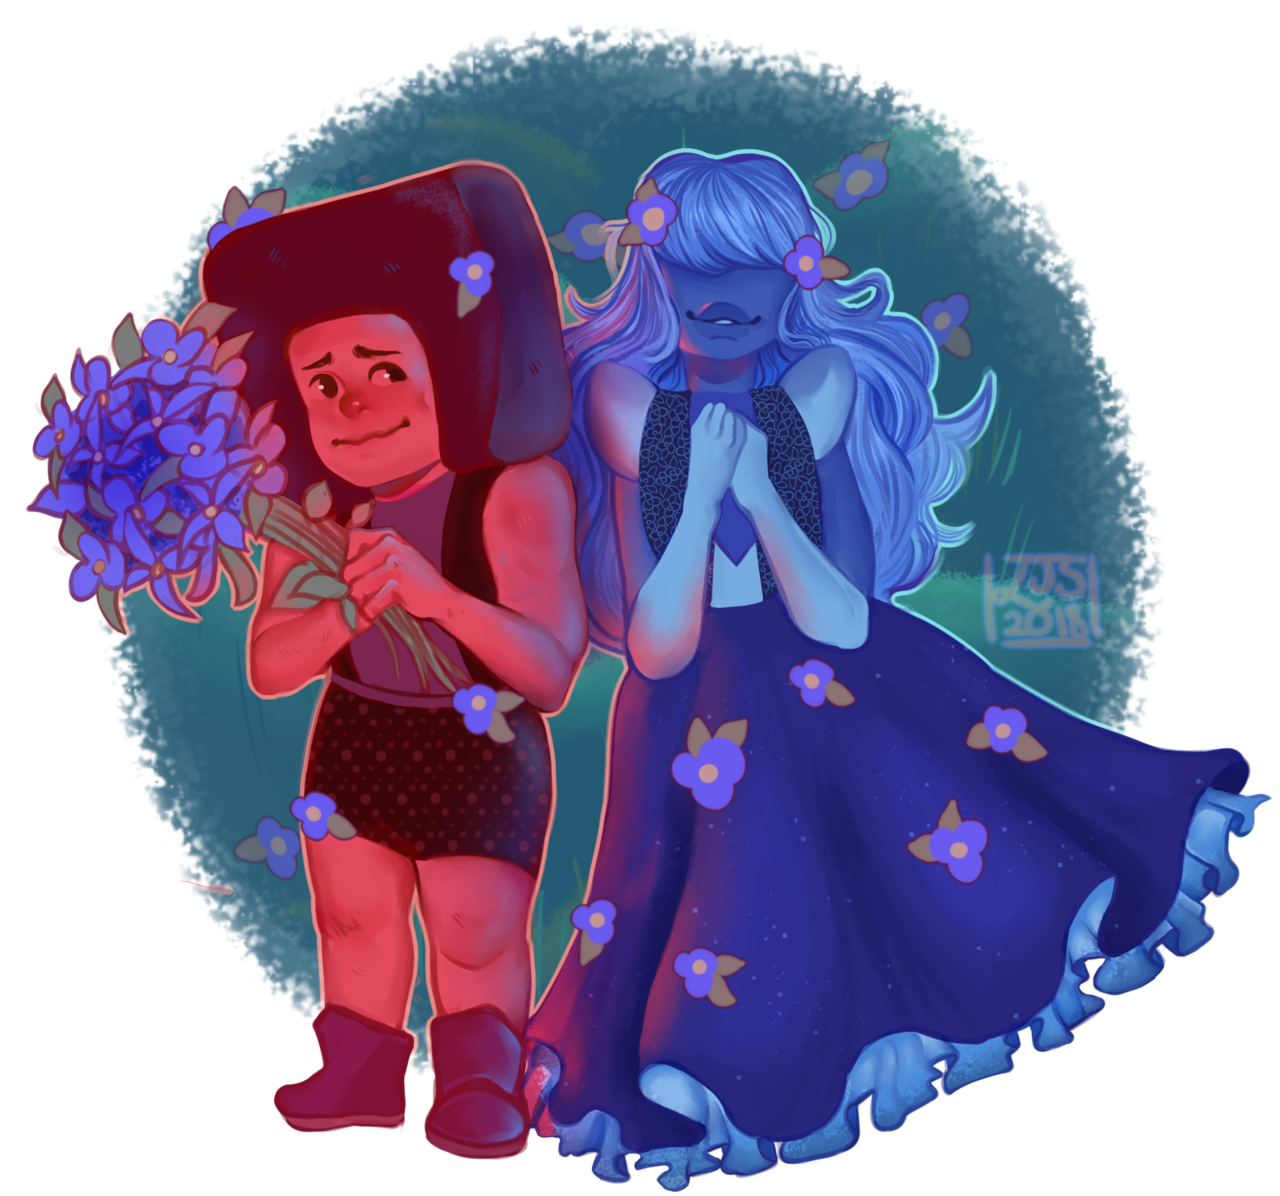 Pride month illustration series: Day 2- Theme: Red and Blue. Got to love the wonderful contrasting relationships between these two cartoon couples: Ruby and Sapphire from Steven Universe and Cherry...